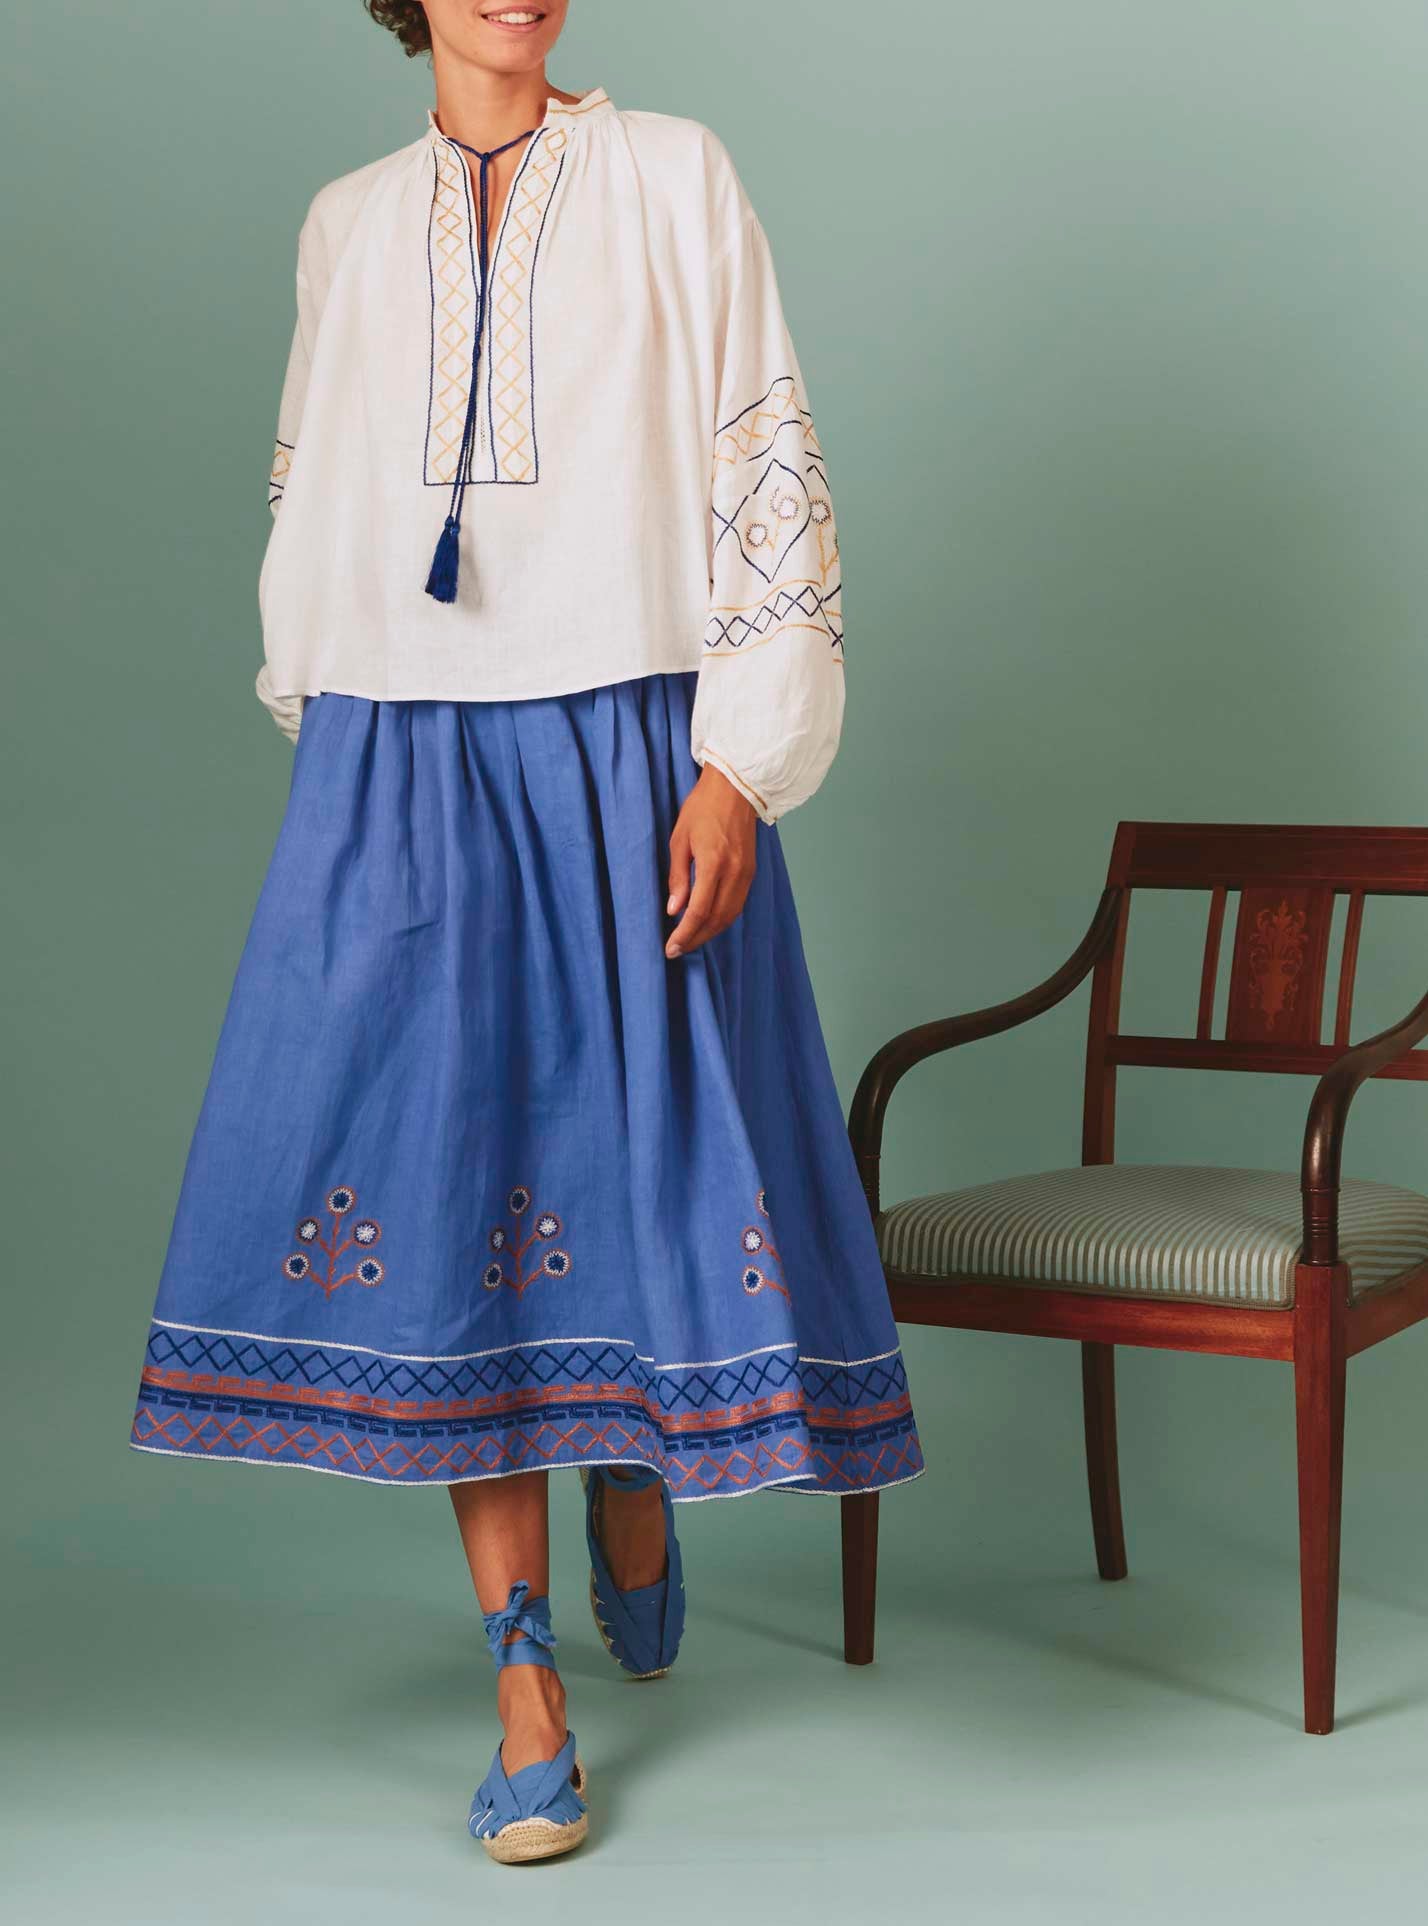 Front view Guise Blouse with Archaic Embroidery in White by Thierry Colson, with Zazou skirt in blue lavender